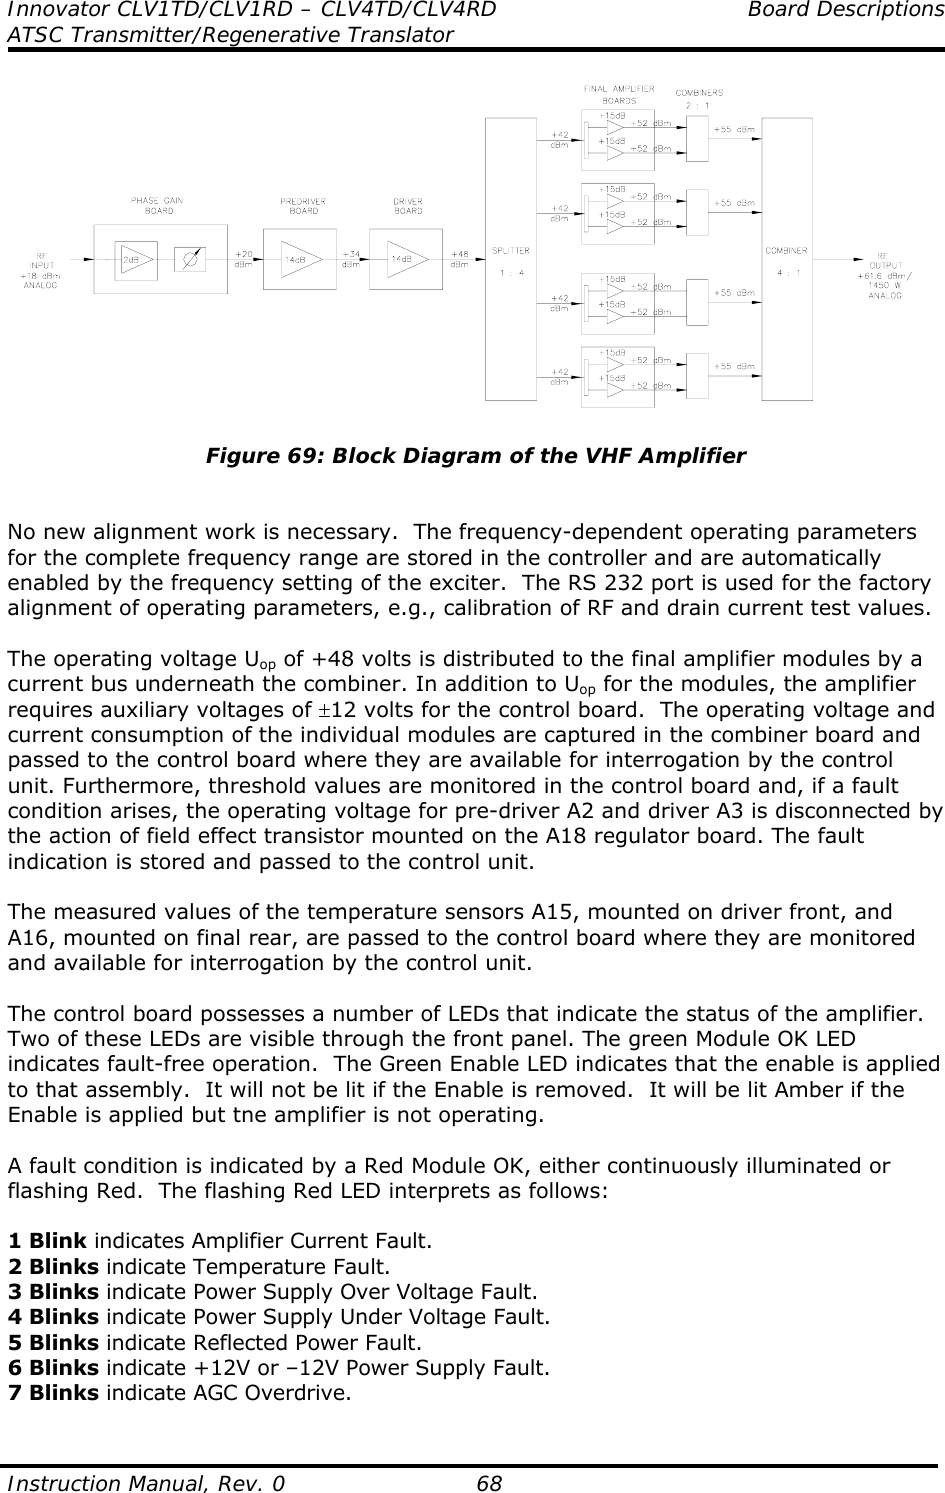 Innovator CLV1TD/CLV1RD – CLV4TD/CLV4RD  Board Descriptions ATSC Transmitter/Regenerative Translator  Instruction Manual, Rev. 0    68  Figure 69: Block Diagram of the VHF Amplifier   No new alignment work is necessary.  The frequency-dependent operating parameters for the complete frequency range are stored in the controller and are automatically enabled by the frequency setting of the exciter.  The RS 232 port is used for the factory alignment of operating parameters, e.g., calibration of RF and drain current test values.   The operating voltage Uop of +48 volts is distributed to the final amplifier modules by a current bus underneath the combiner. In addition to Uop for the modules, the amplifier requires auxiliary voltages of ±12 volts for the control board.  The operating voltage and current consumption of the individual modules are captured in the combiner board and passed to the control board where they are available for interrogation by the control unit. Furthermore, threshold values are monitored in the control board and, if a fault condition arises, the operating voltage for pre-driver A2 and driver A3 is disconnected by the action of field effect transistor mounted on the A18 regulator board. The fault indication is stored and passed to the control unit.   The measured values of the temperature sensors A15, mounted on driver front, and A16, mounted on final rear, are passed to the control board where they are monitored and available for interrogation by the control unit.  The control board possesses a number of LEDs that indicate the status of the amplifier. Two of these LEDs are visible through the front panel. The green Module OK LED indicates fault-free operation.  The Green Enable LED indicates that the enable is applied to that assembly.  It will not be lit if the Enable is removed.  It will be lit Amber if the Enable is applied but tne amplifier is not operating.  A fault condition is indicated by a Red Module OK, either continuously illuminated or flashing Red.  The flashing Red LED interprets as follows:  1 Blink indicates Amplifier Current Fault. 2 Blinks indicate Temperature Fault. 3 Blinks indicate Power Supply Over Voltage Fault. 4 Blinks indicate Power Supply Under Voltage Fault. 5 Blinks indicate Reflected Power Fault. 6 Blinks indicate +12V or –12V Power Supply Fault. 7 Blinks indicate AGC Overdrive.  